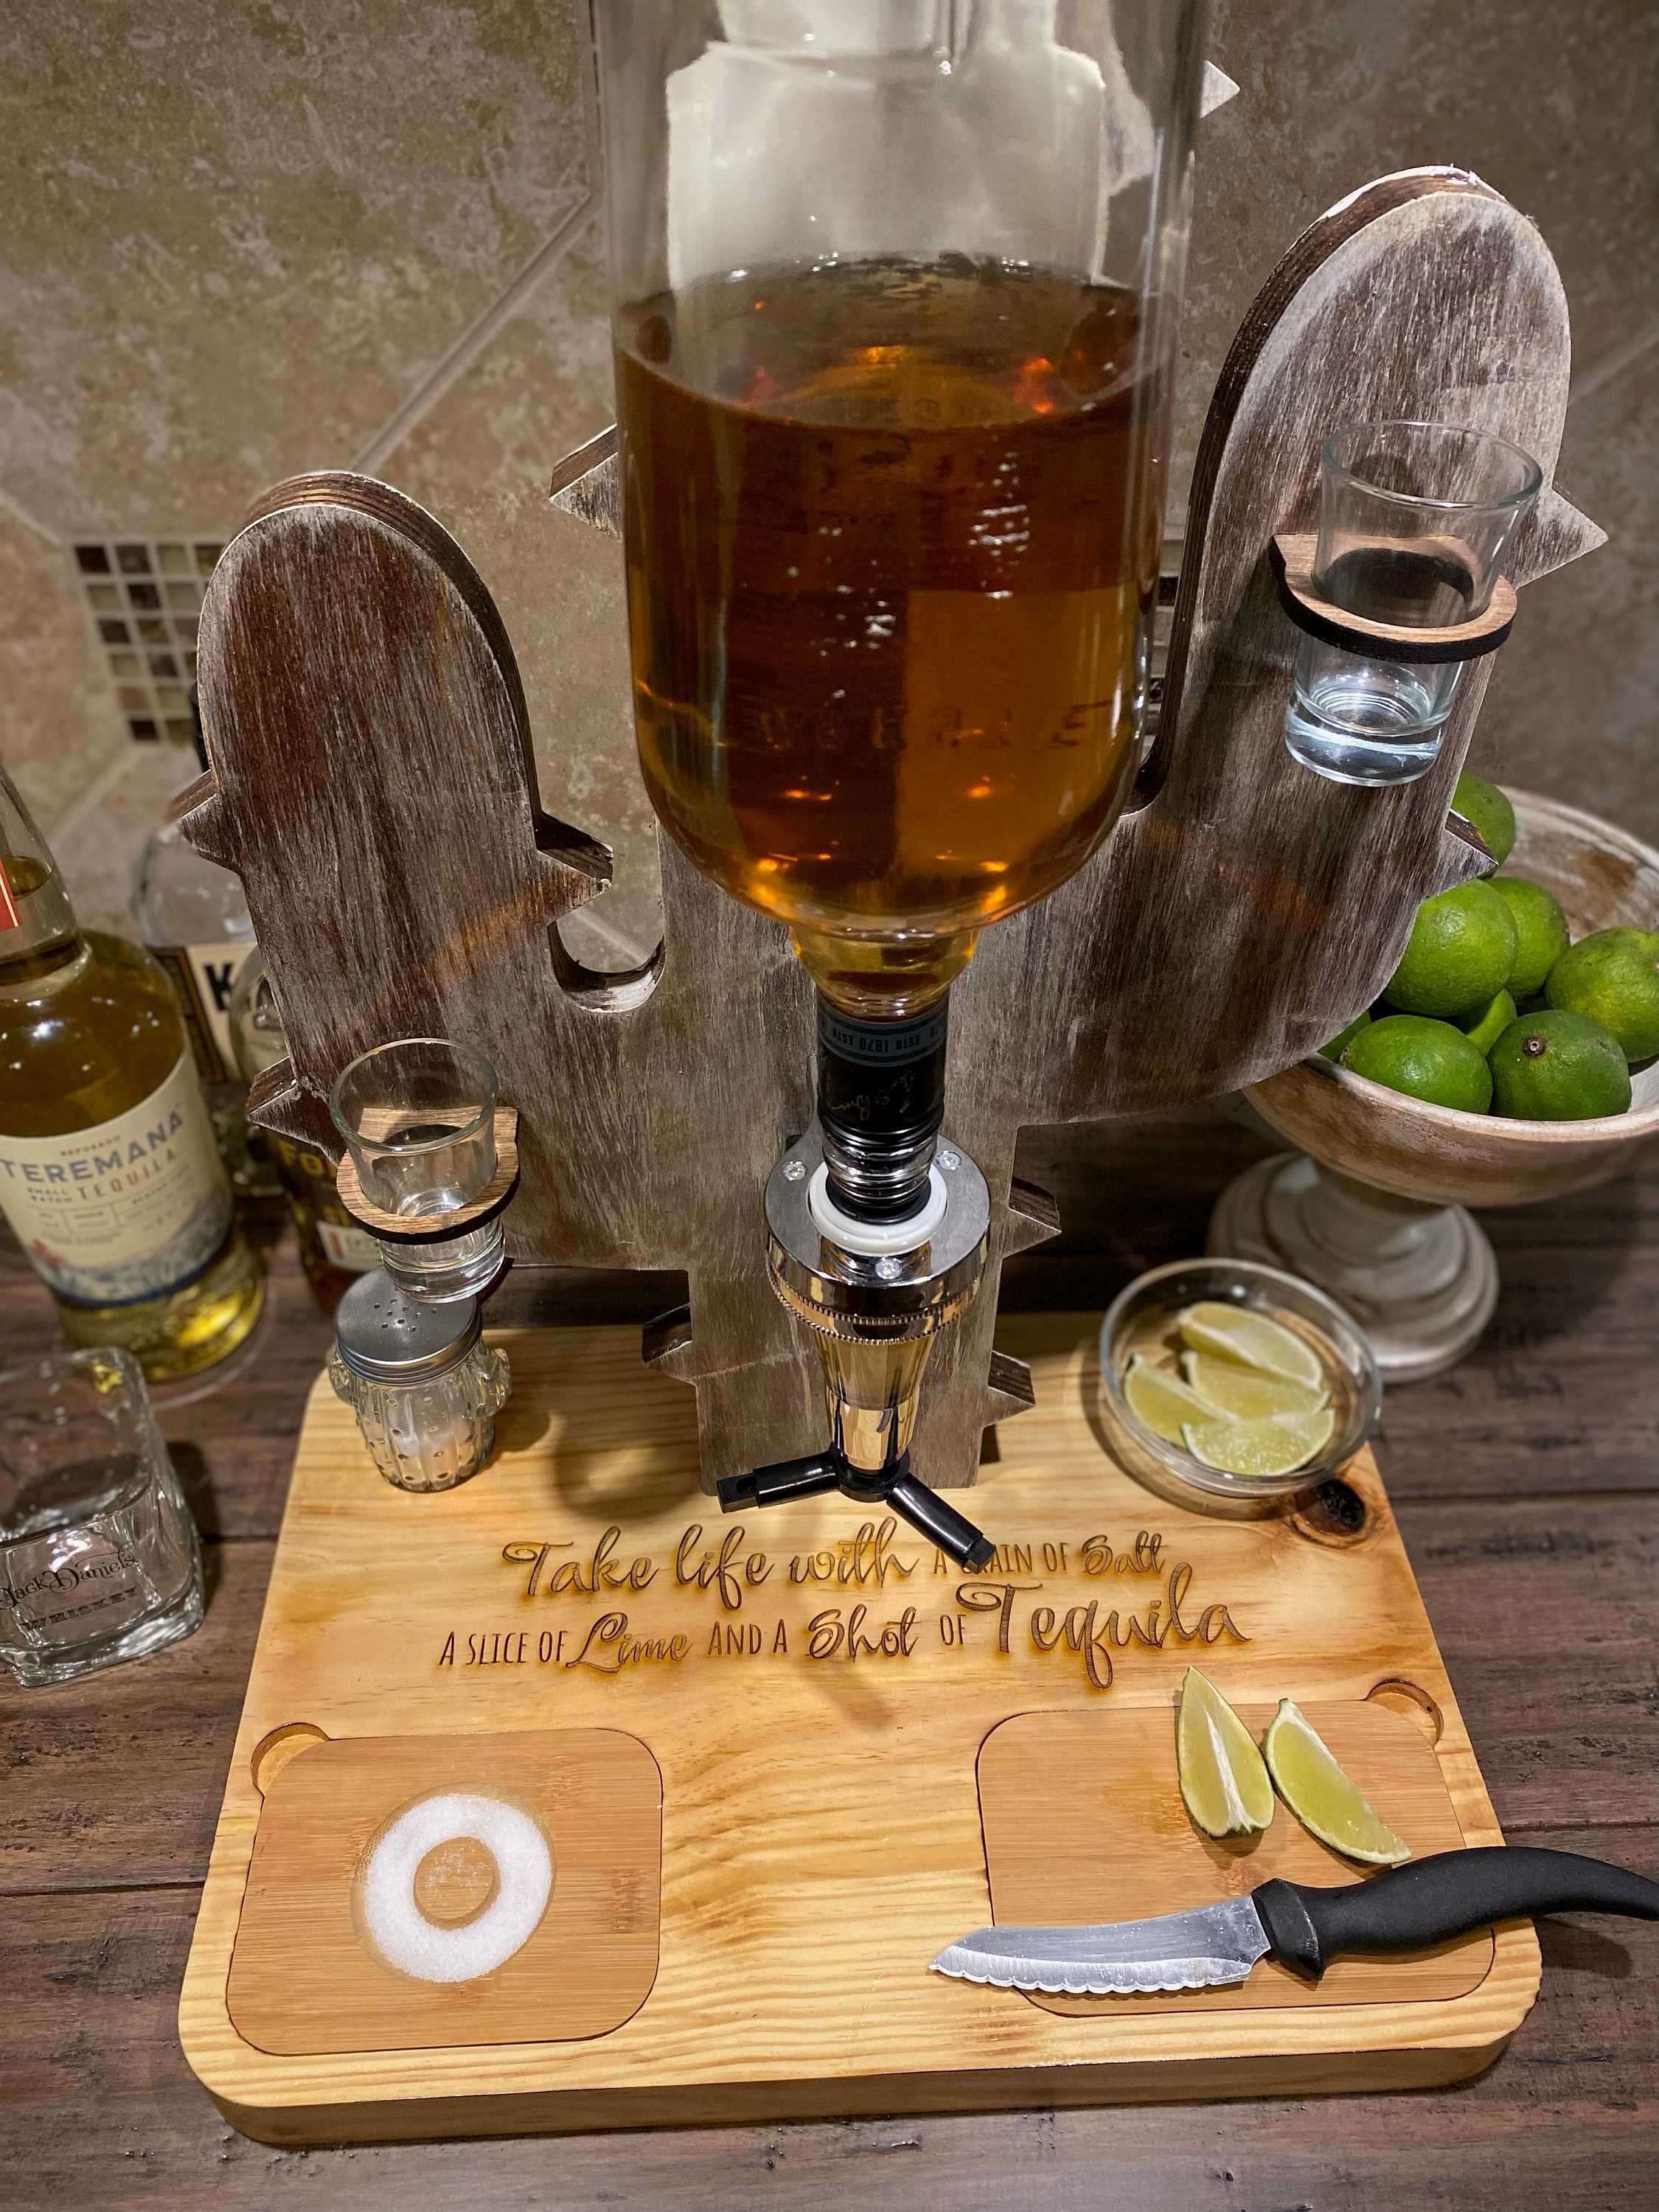 Shot Barware Brandy Tequila Flight Paddle with glasses Set of 8 Home Pro Bartenders Bar Tasting Accessory for Party Vodka Whiskey Rum Cocktail Serveware Thick Wooden Serving Base 